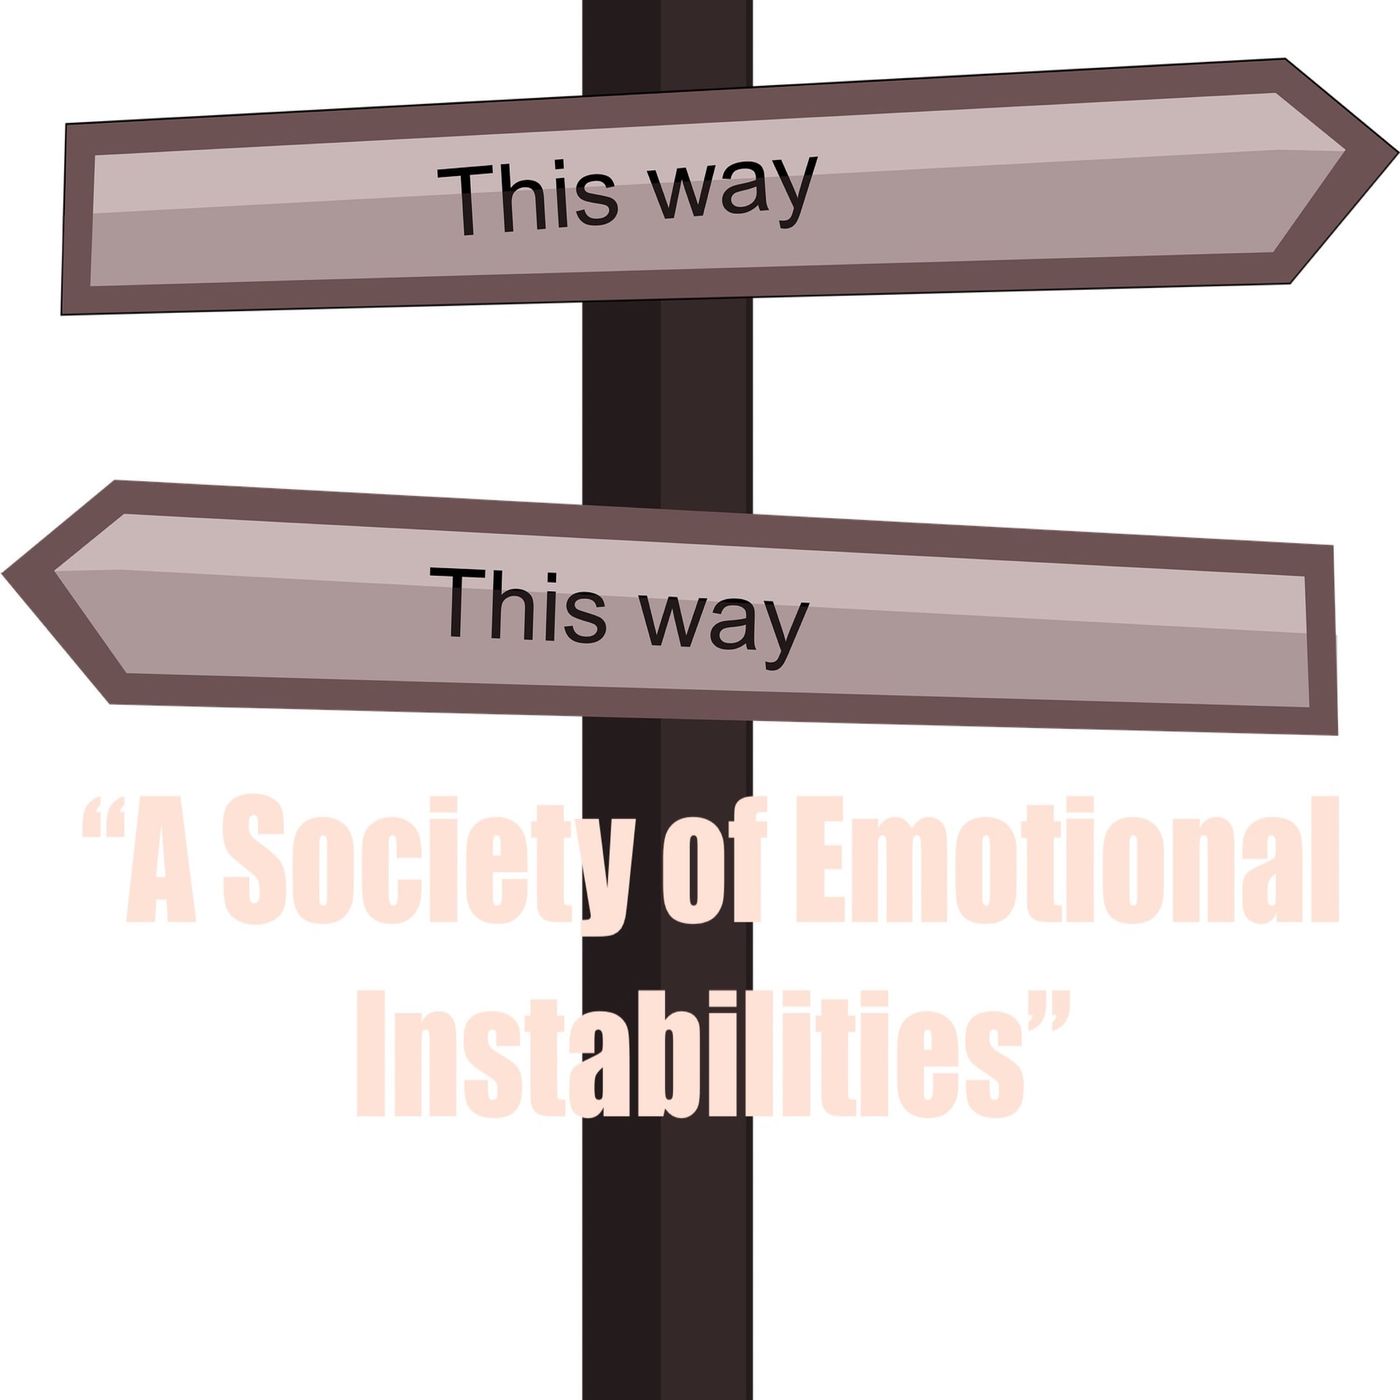 Episode 25 - "A Society of Emotional Instabilities"